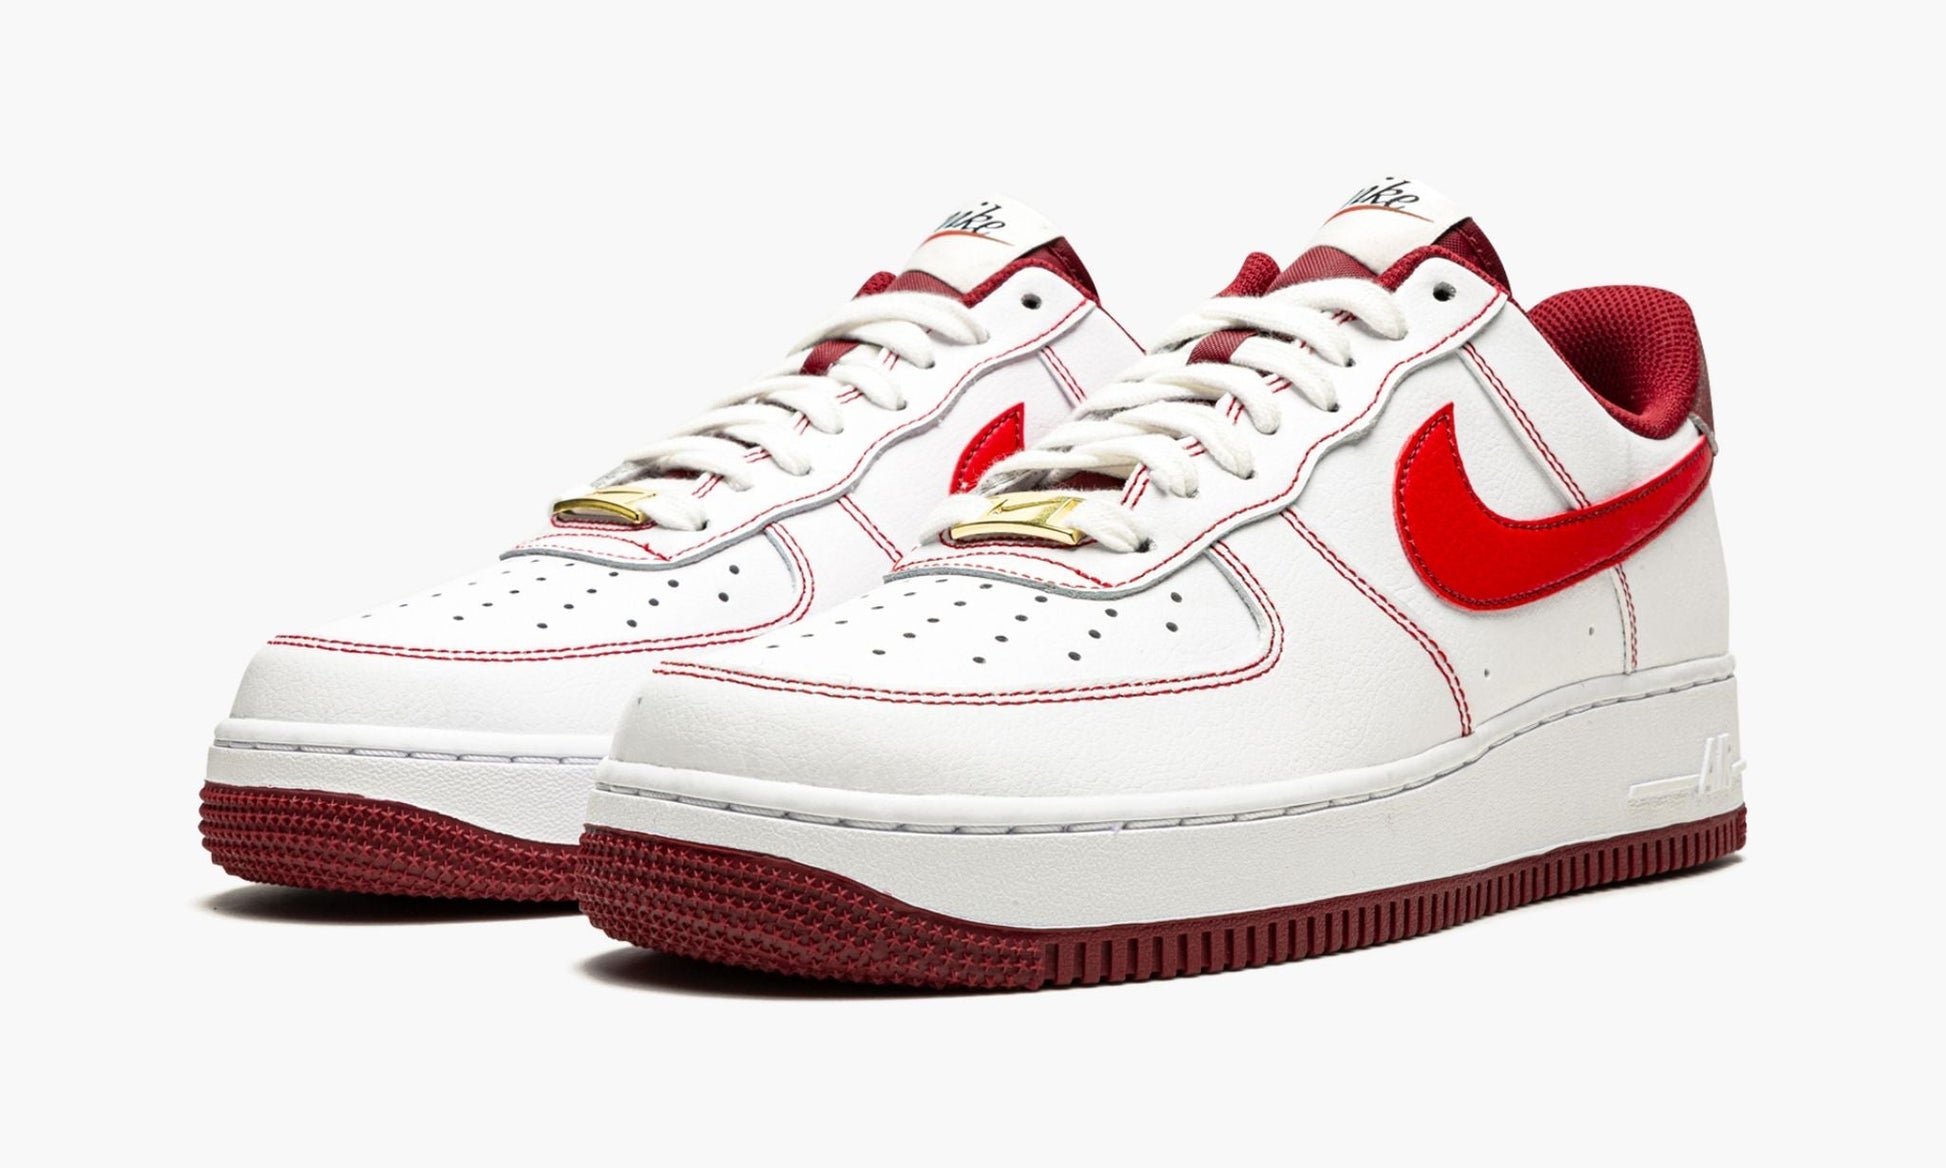 Air Force 1 Low '07 "First Use - Team Red"